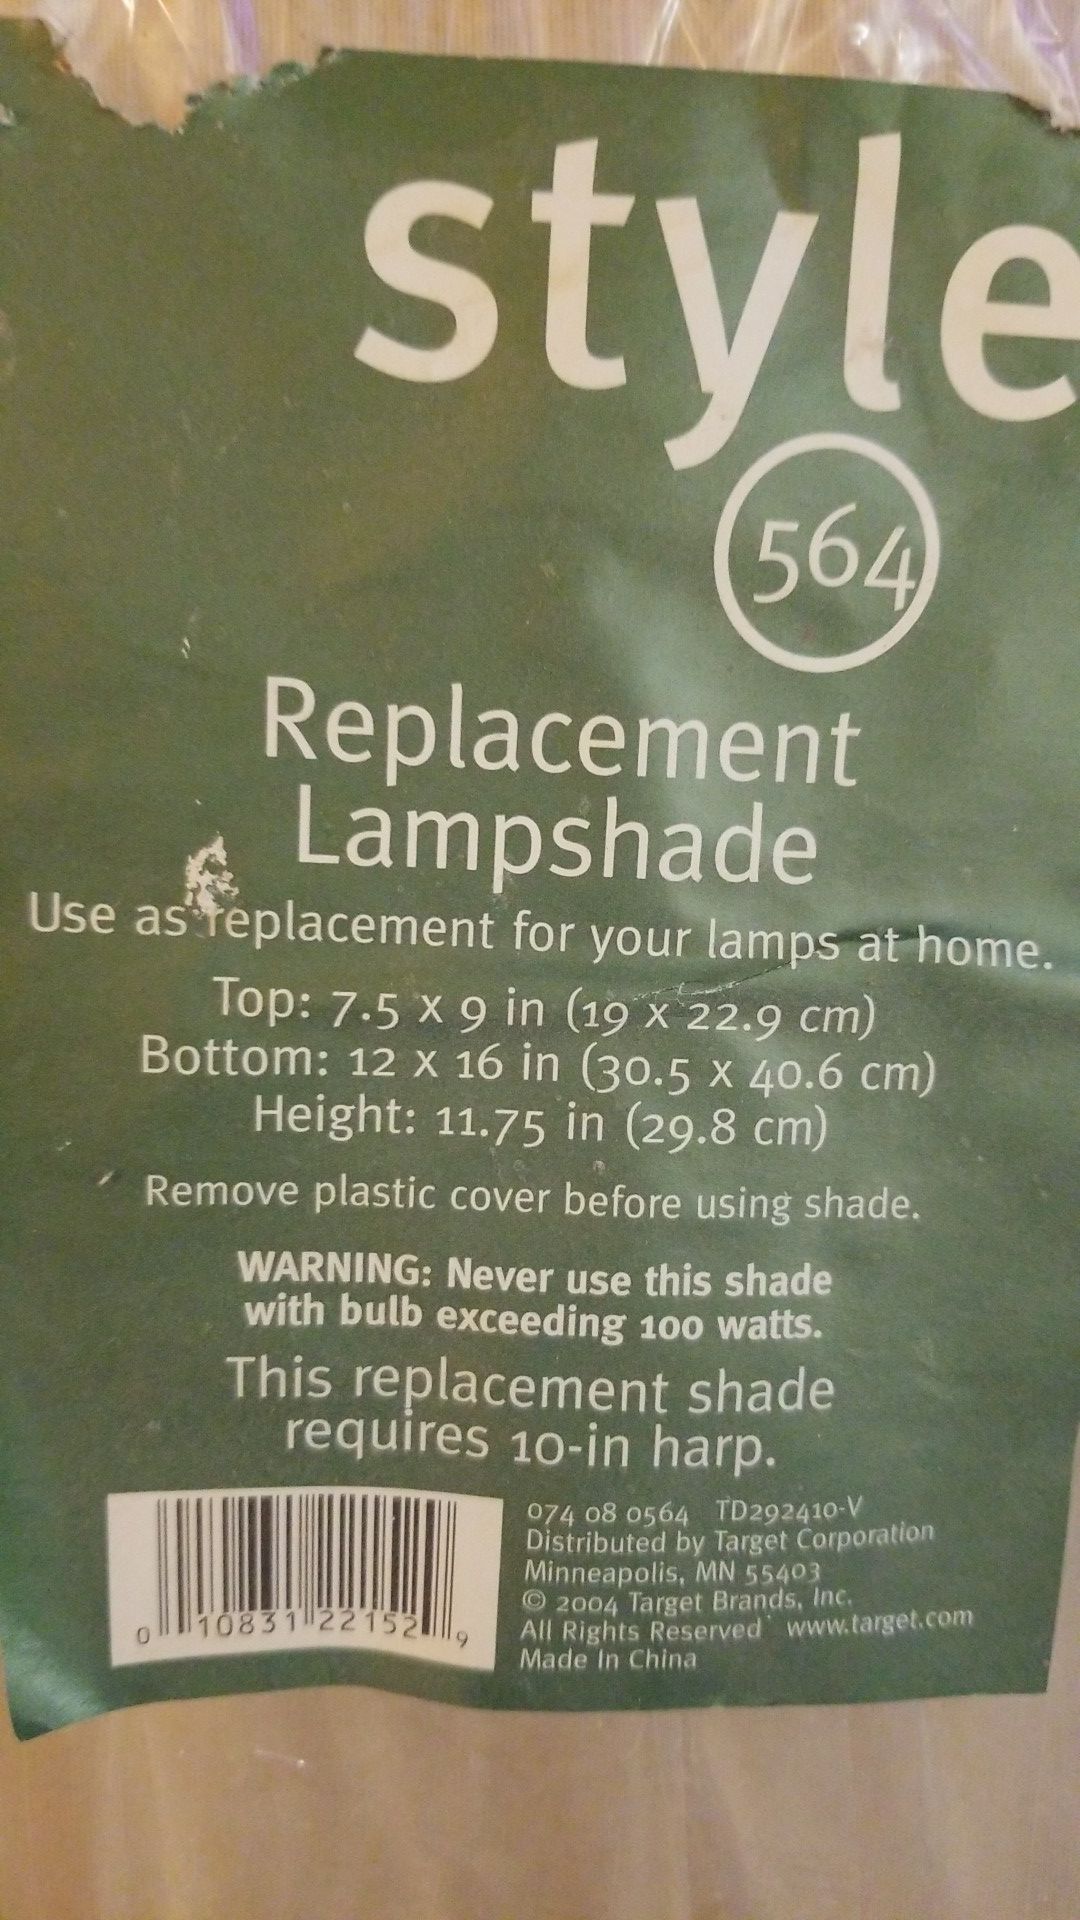 Replacement lamp shade